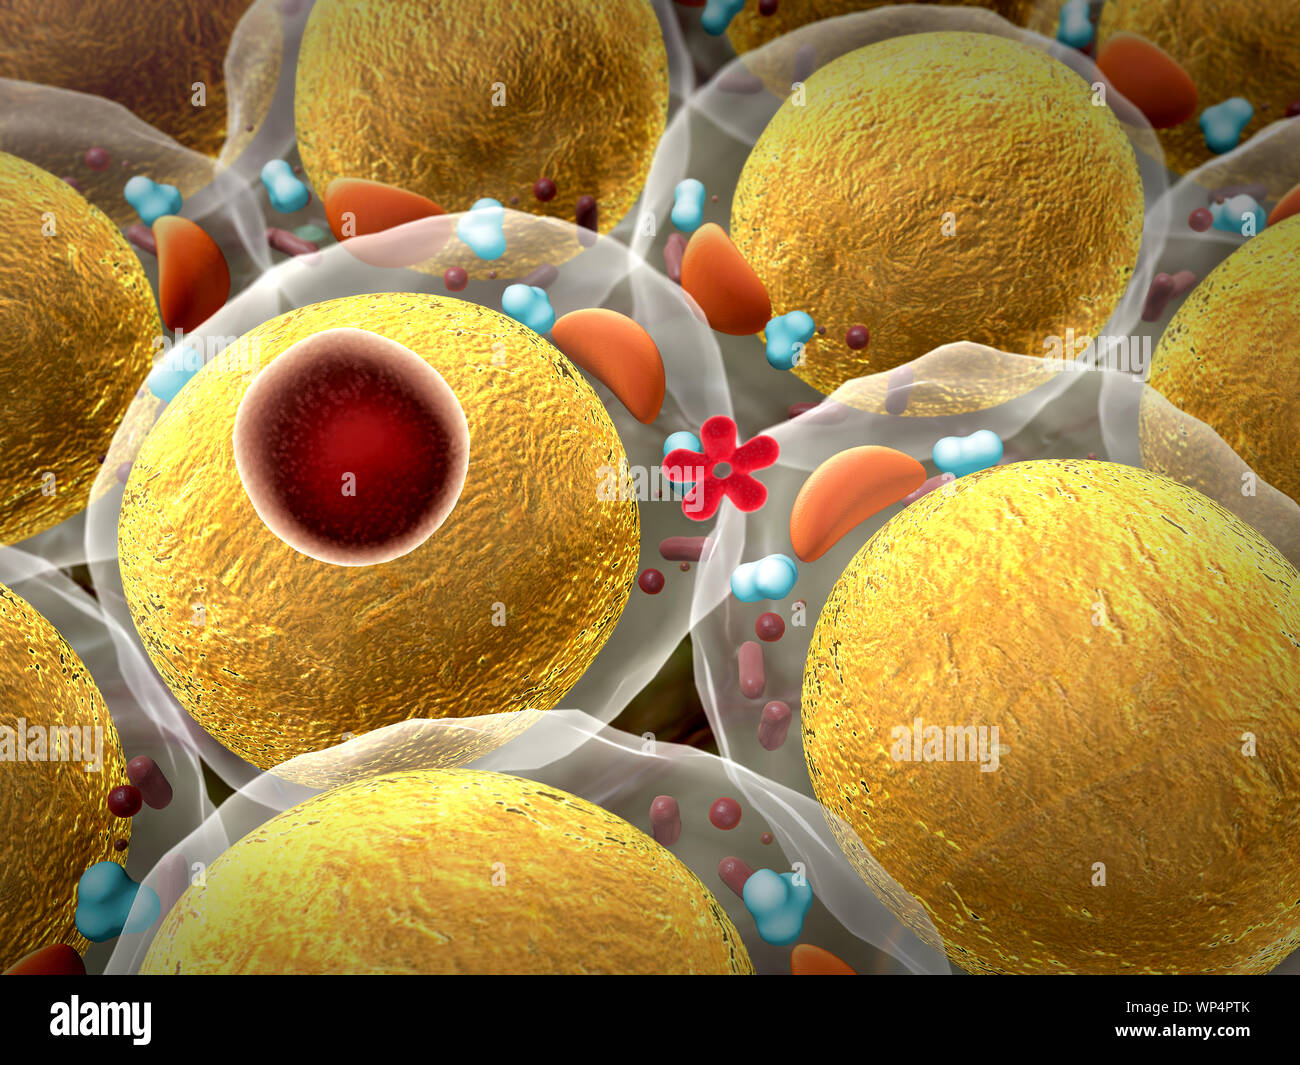 field of fat cells Stock Photo